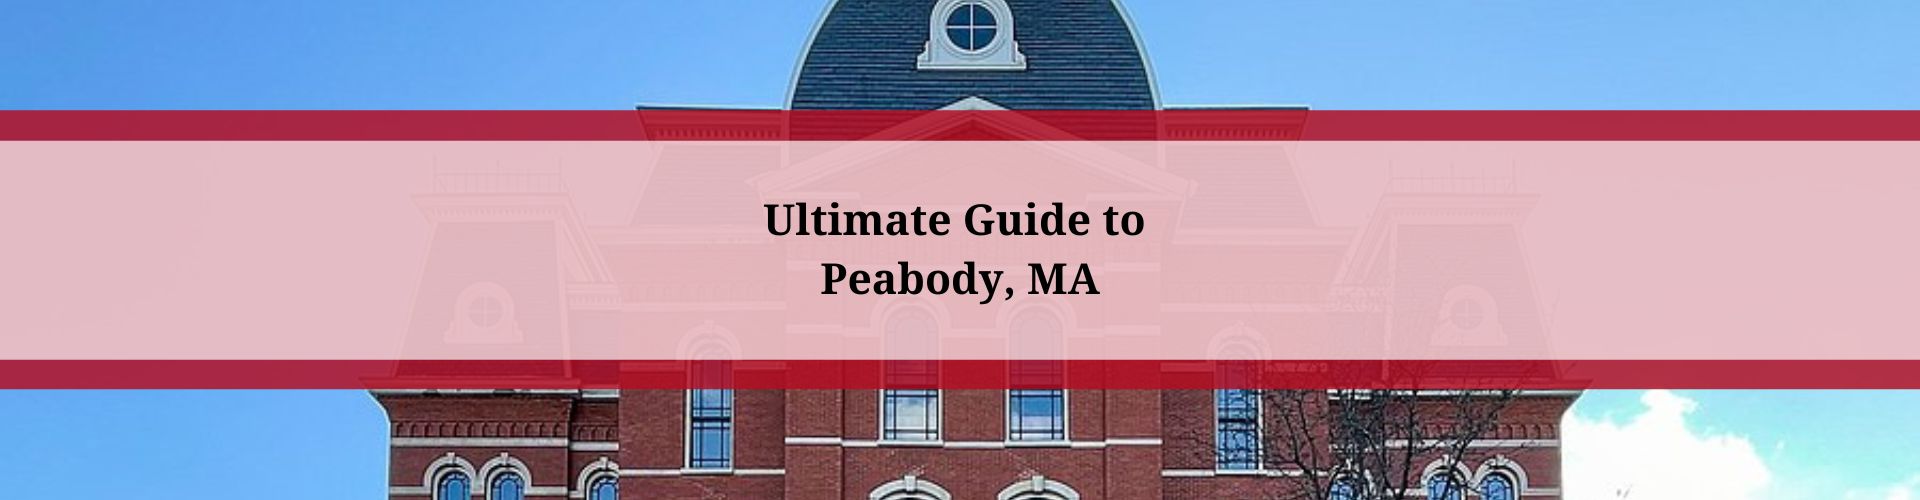 Guide to Peabody MA